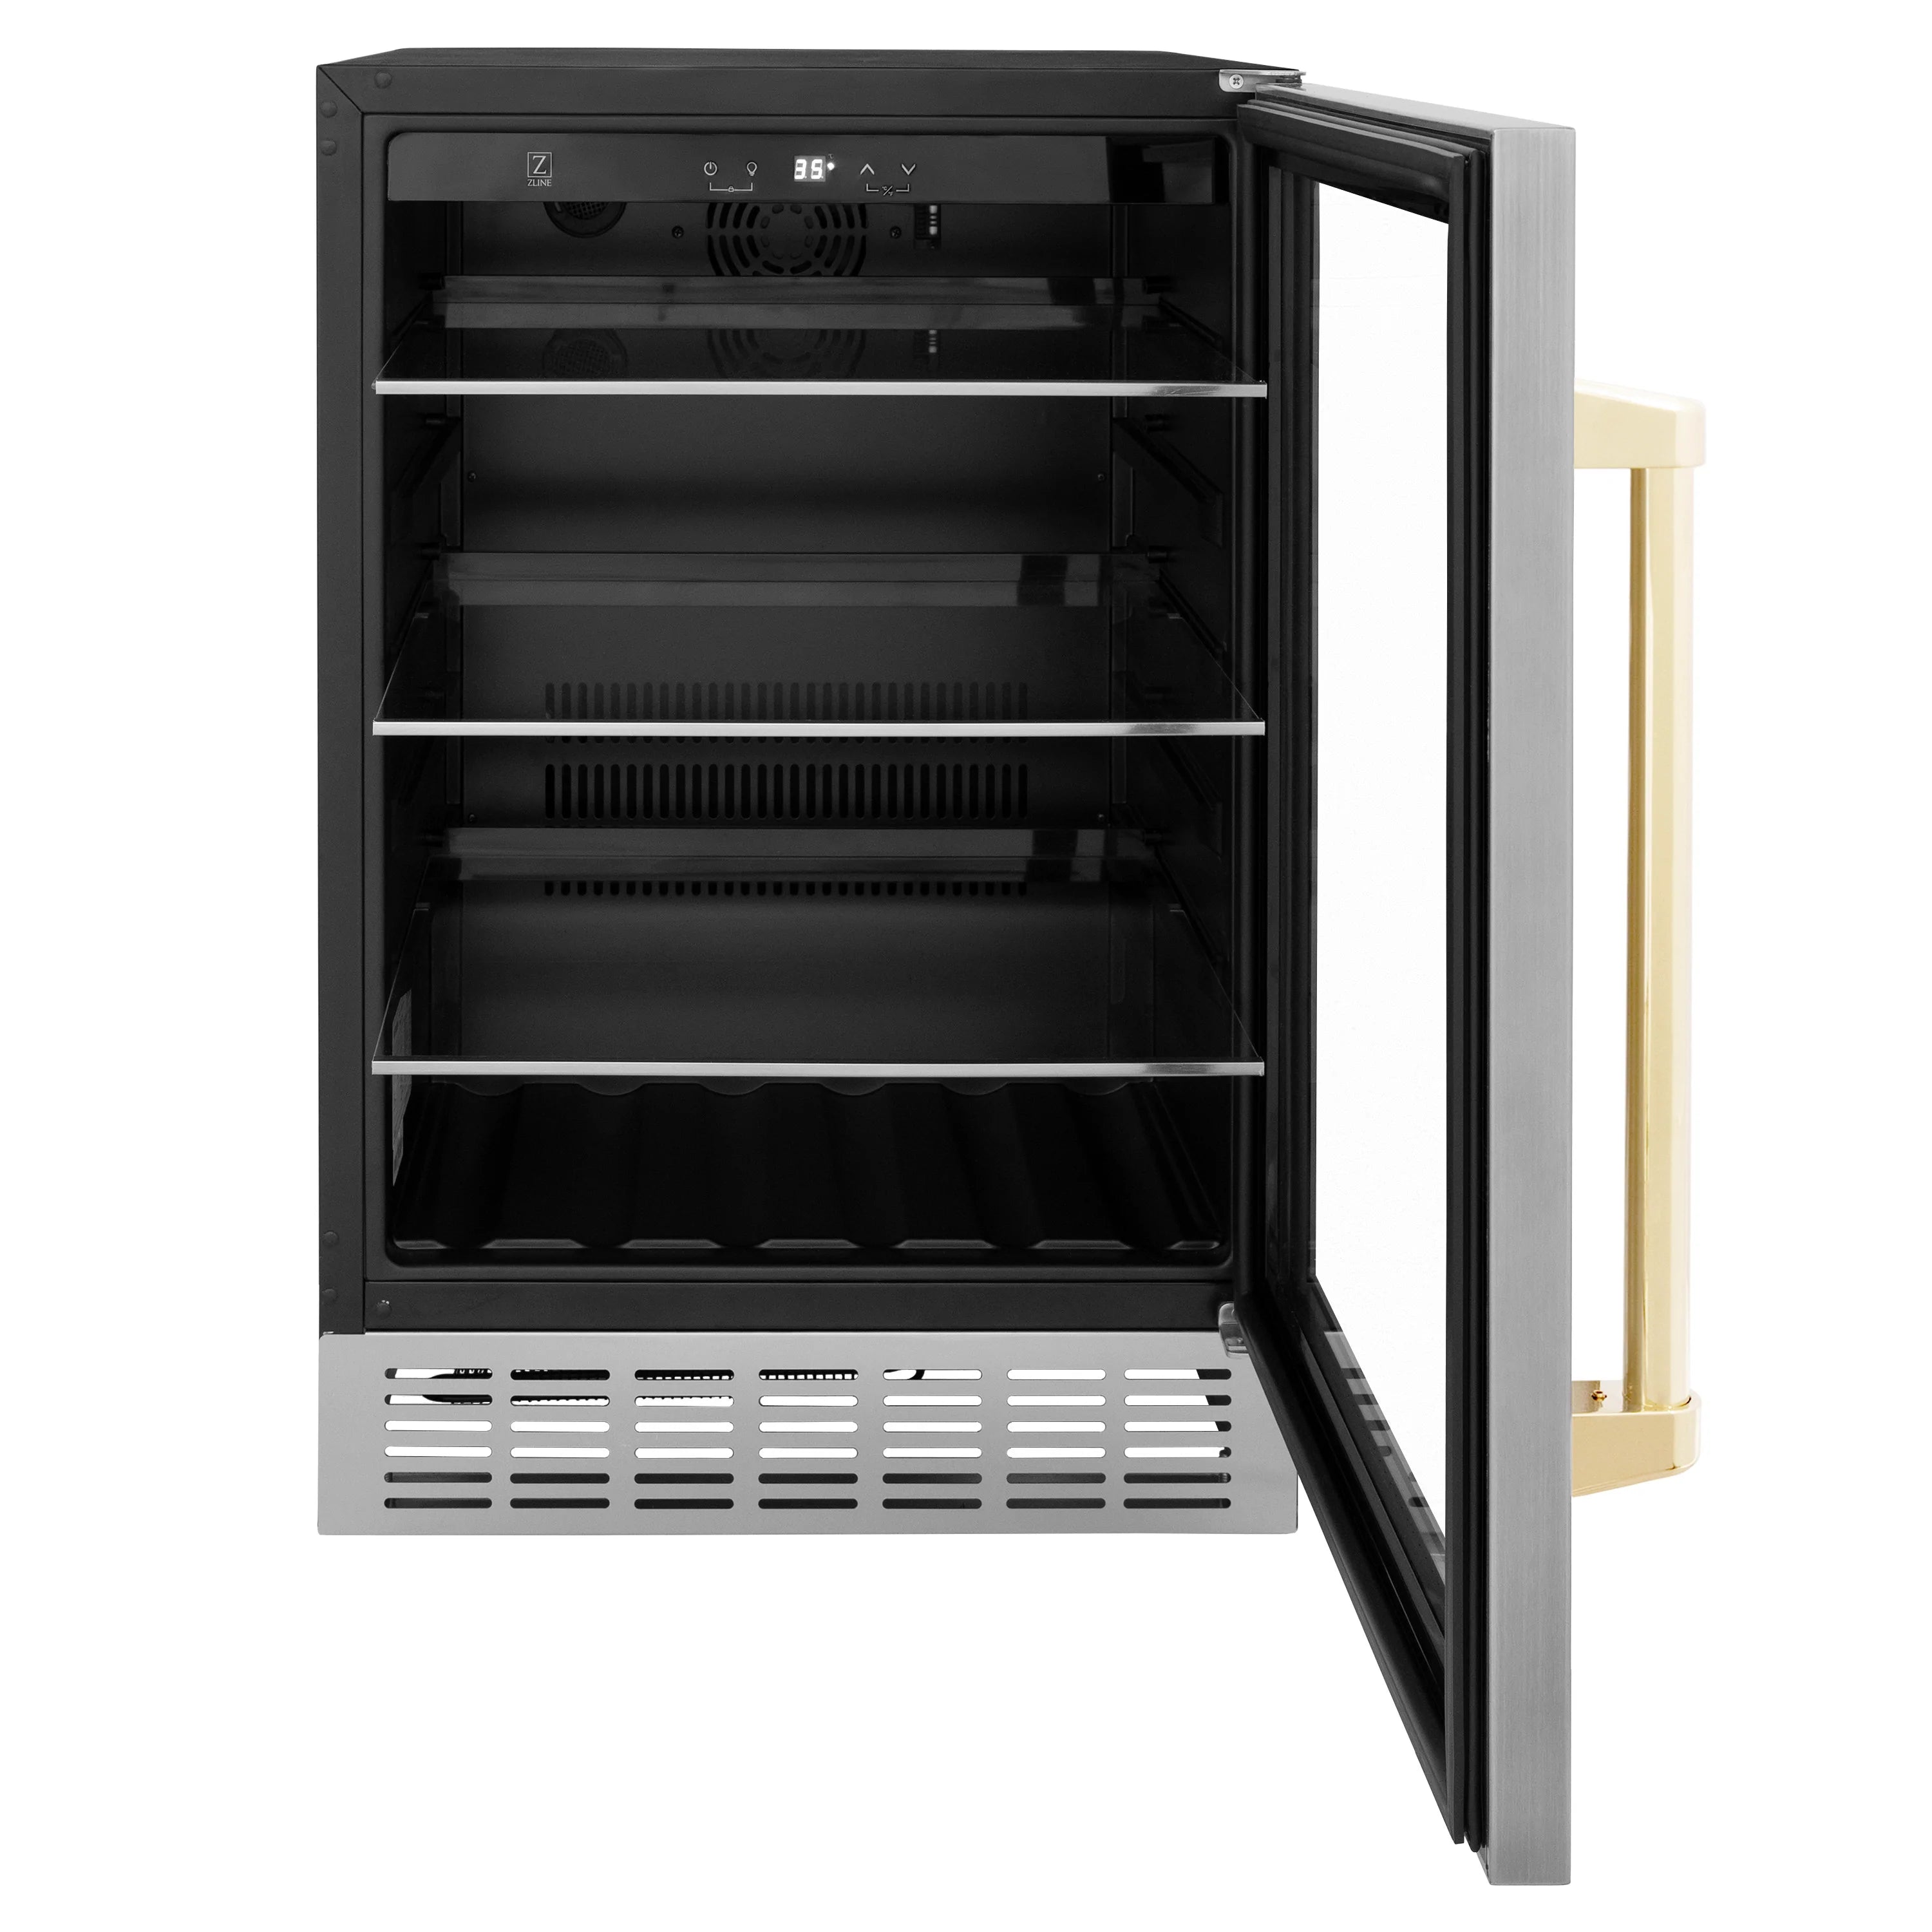 ZLINE 24" Monument 154 Can Beverage Fridge In Stainless Steel with Accents - RBV-US-24